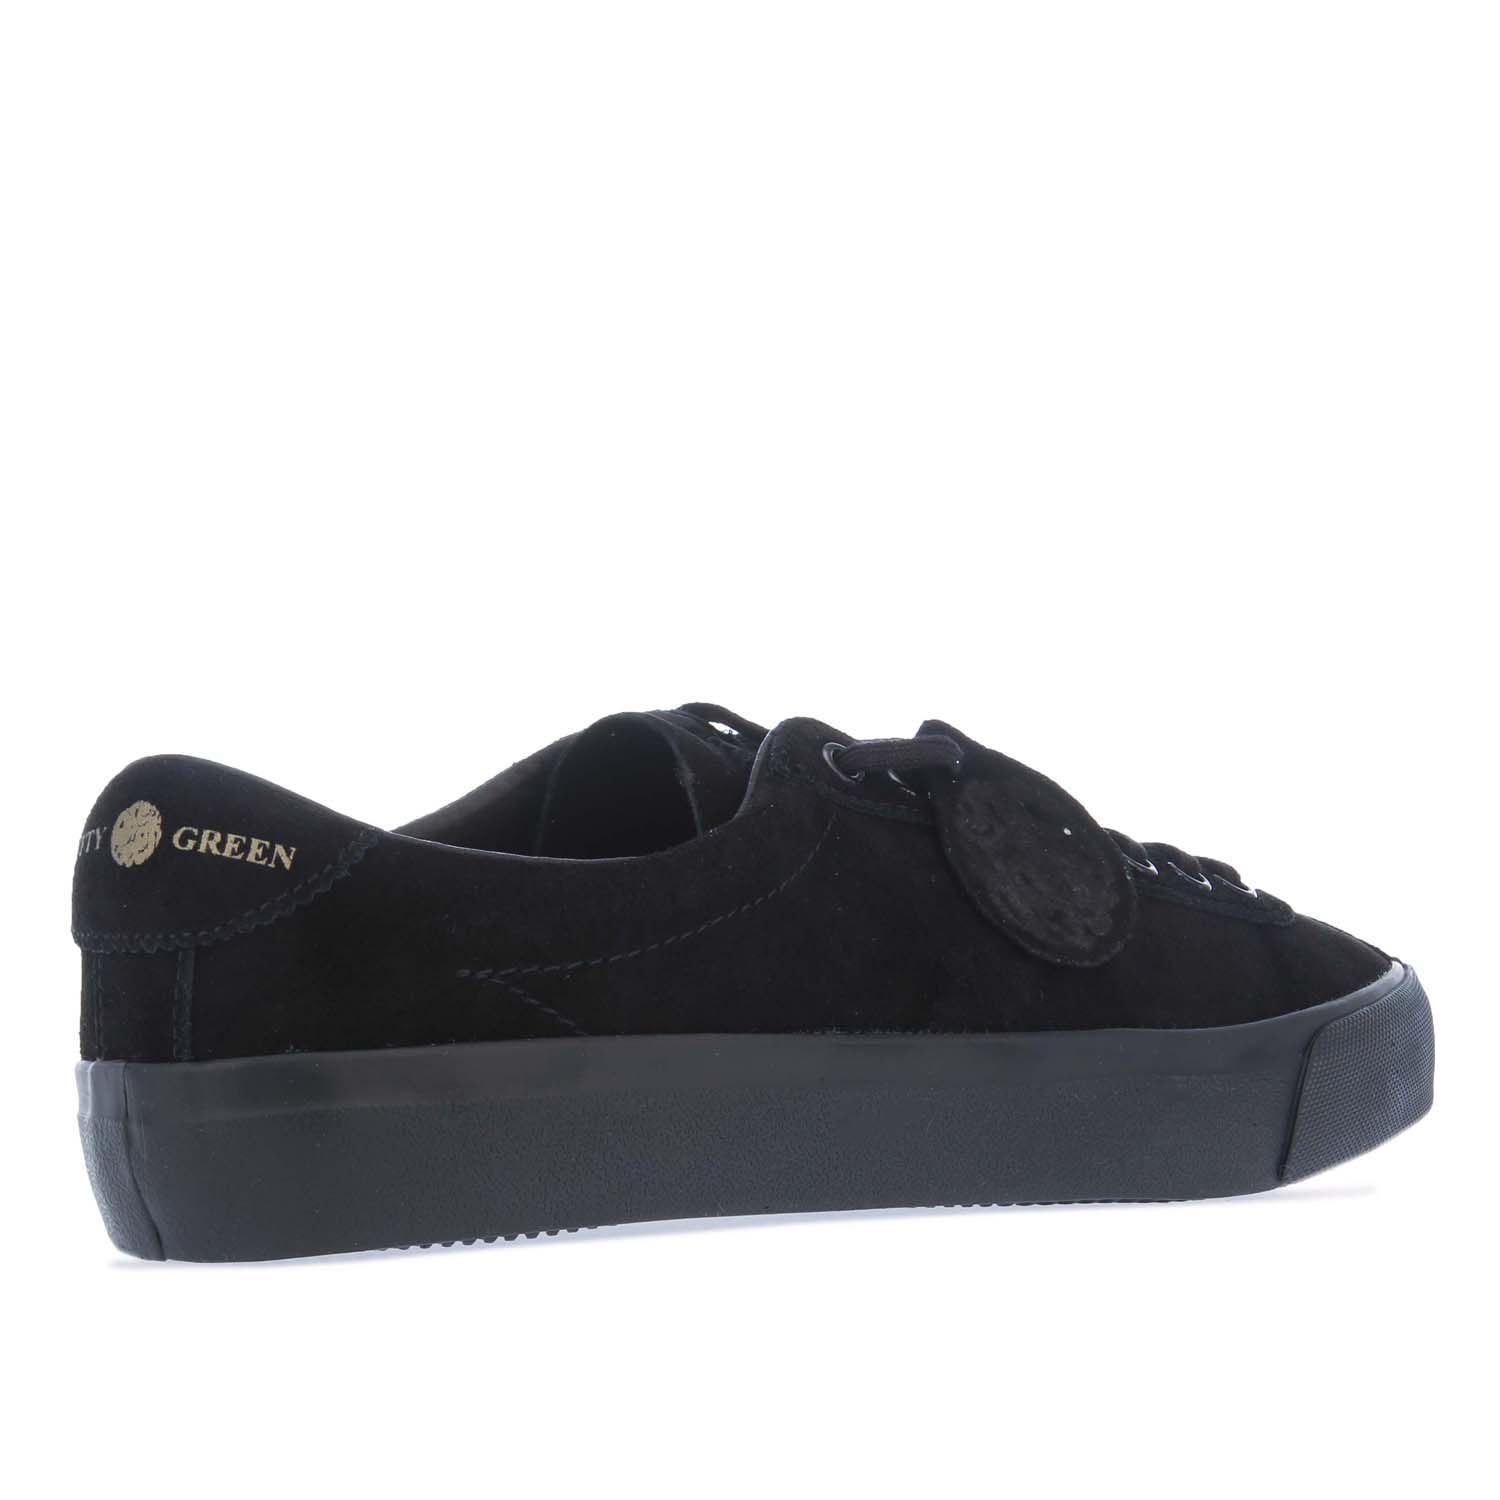 Mens Pretty Green Suede Trainers in black.- Soft suede upper.- Lace up with tonal metalliv eyelets.- Panelled round toes.- Tonal stitching.- Internal branding on the sole.- Gold-tone branding.- Solid rubber sole.- Leather and Suede upper  Leather lining  Synthetic sole.- Ref: S20MU30000156B